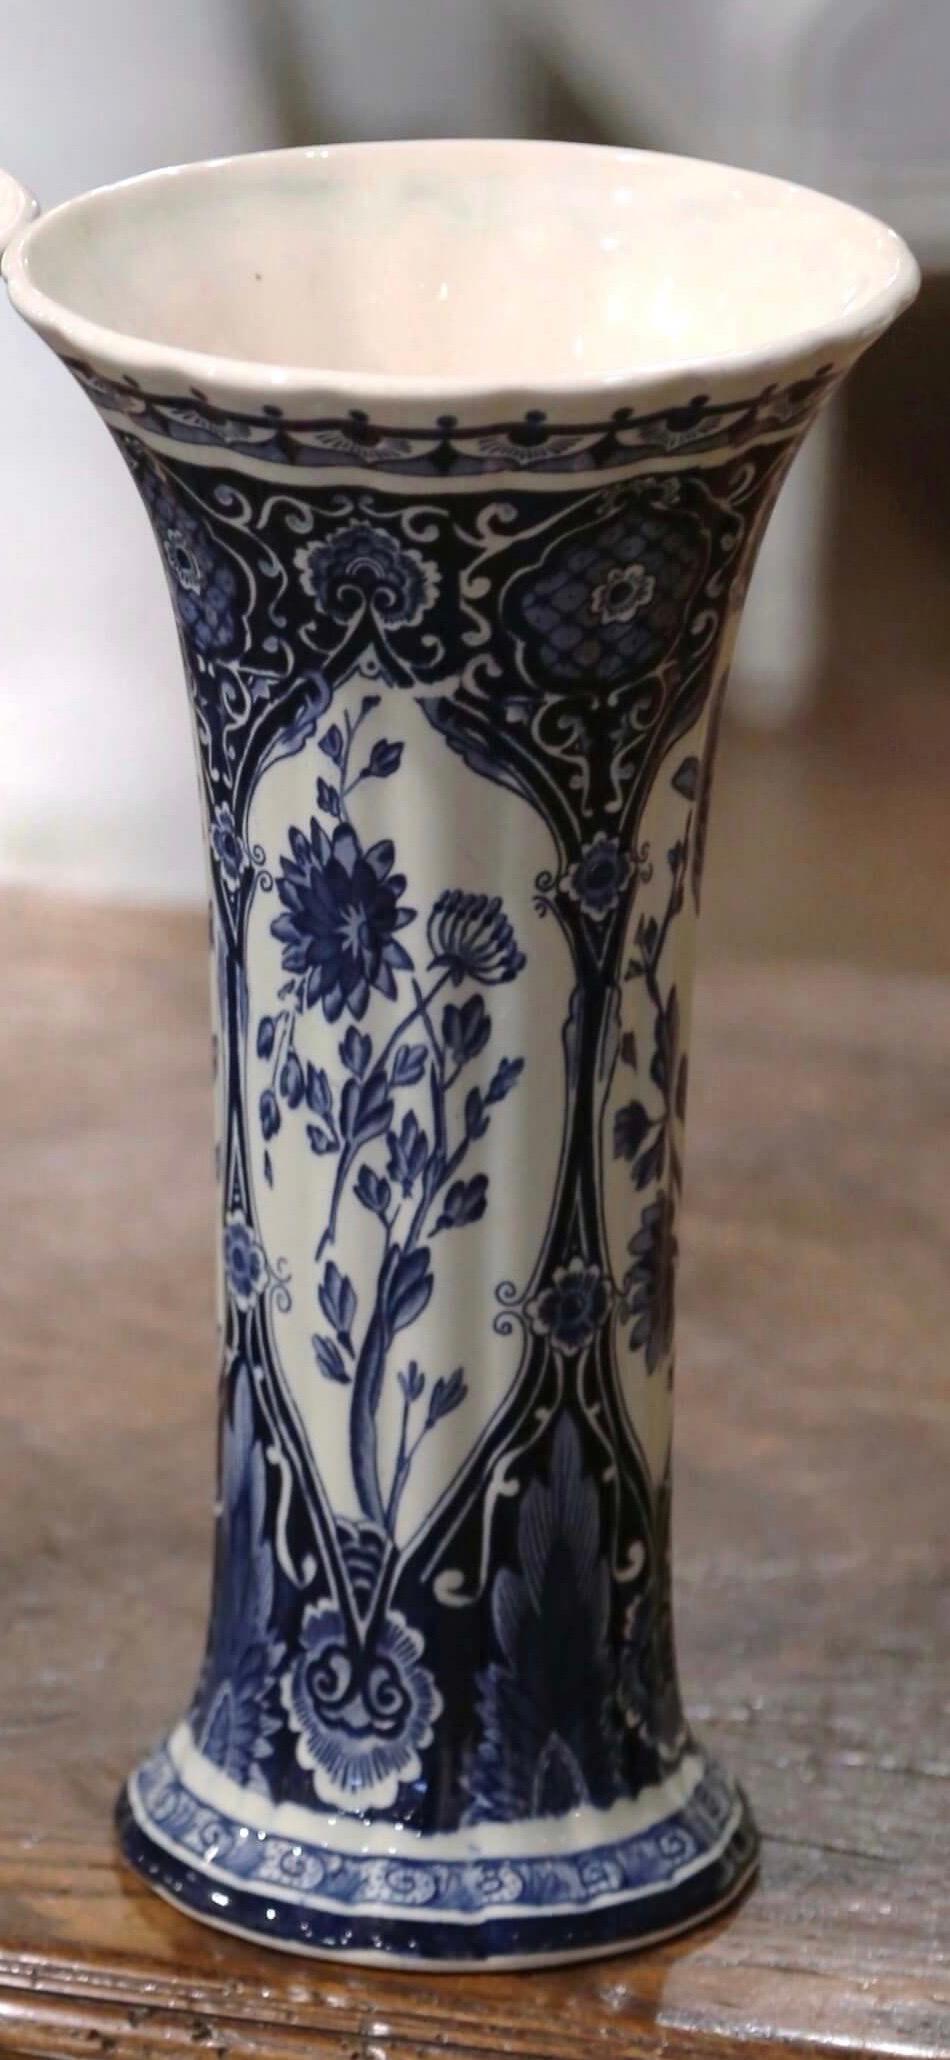 Decorate a shelf or console table with this elegant antique Delft style vase. Crafted in Netherlands circa 1920, the hand-painted trumpet vase is round in shape over a long, elegant, fluted neck. Each vintage vessel is painted in the blue and white